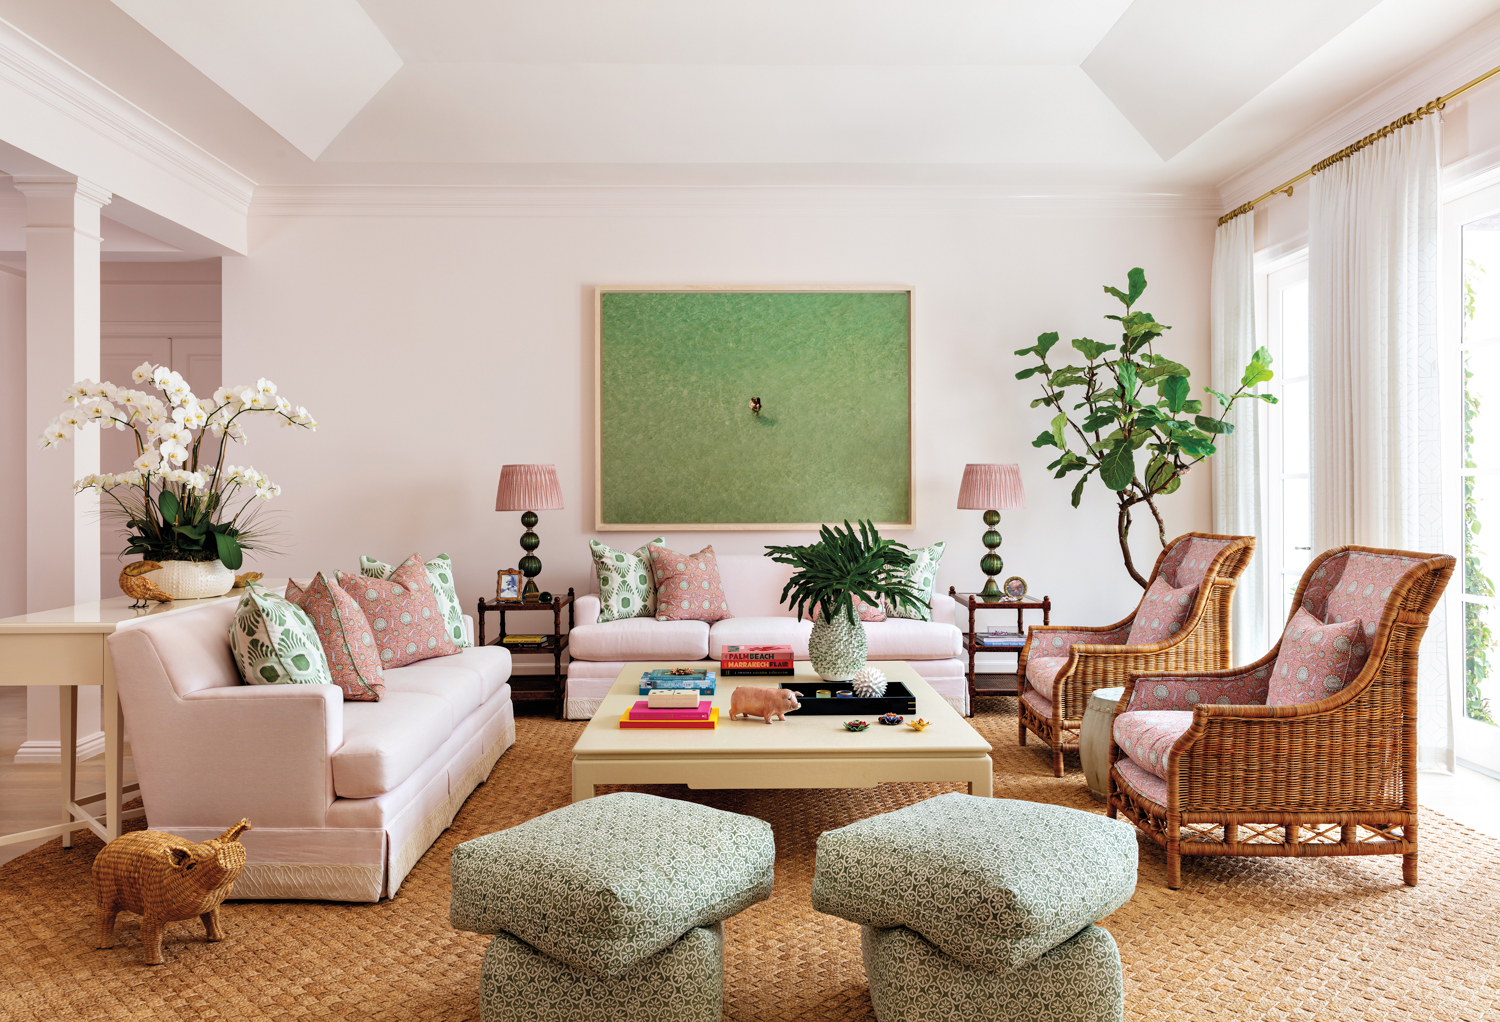 Barbiecore interior design living area with pink sofas and rattan armchairs